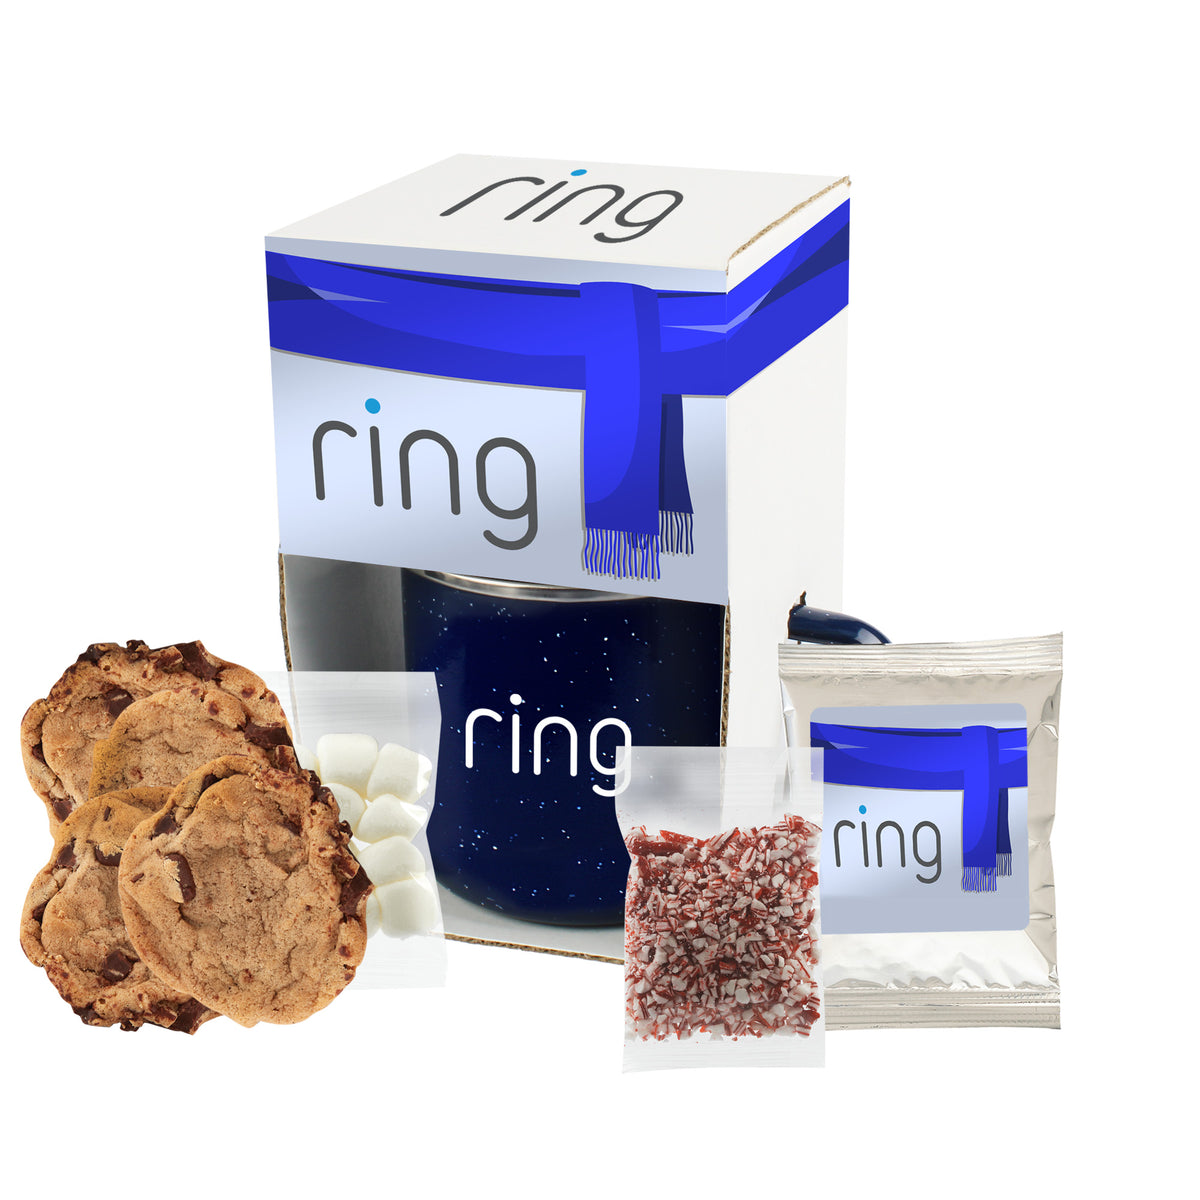 Speckled Camping Mug - 16 oz., Gourmet Chocolate Chip Cookies, Hot Chocolate Holiday Set